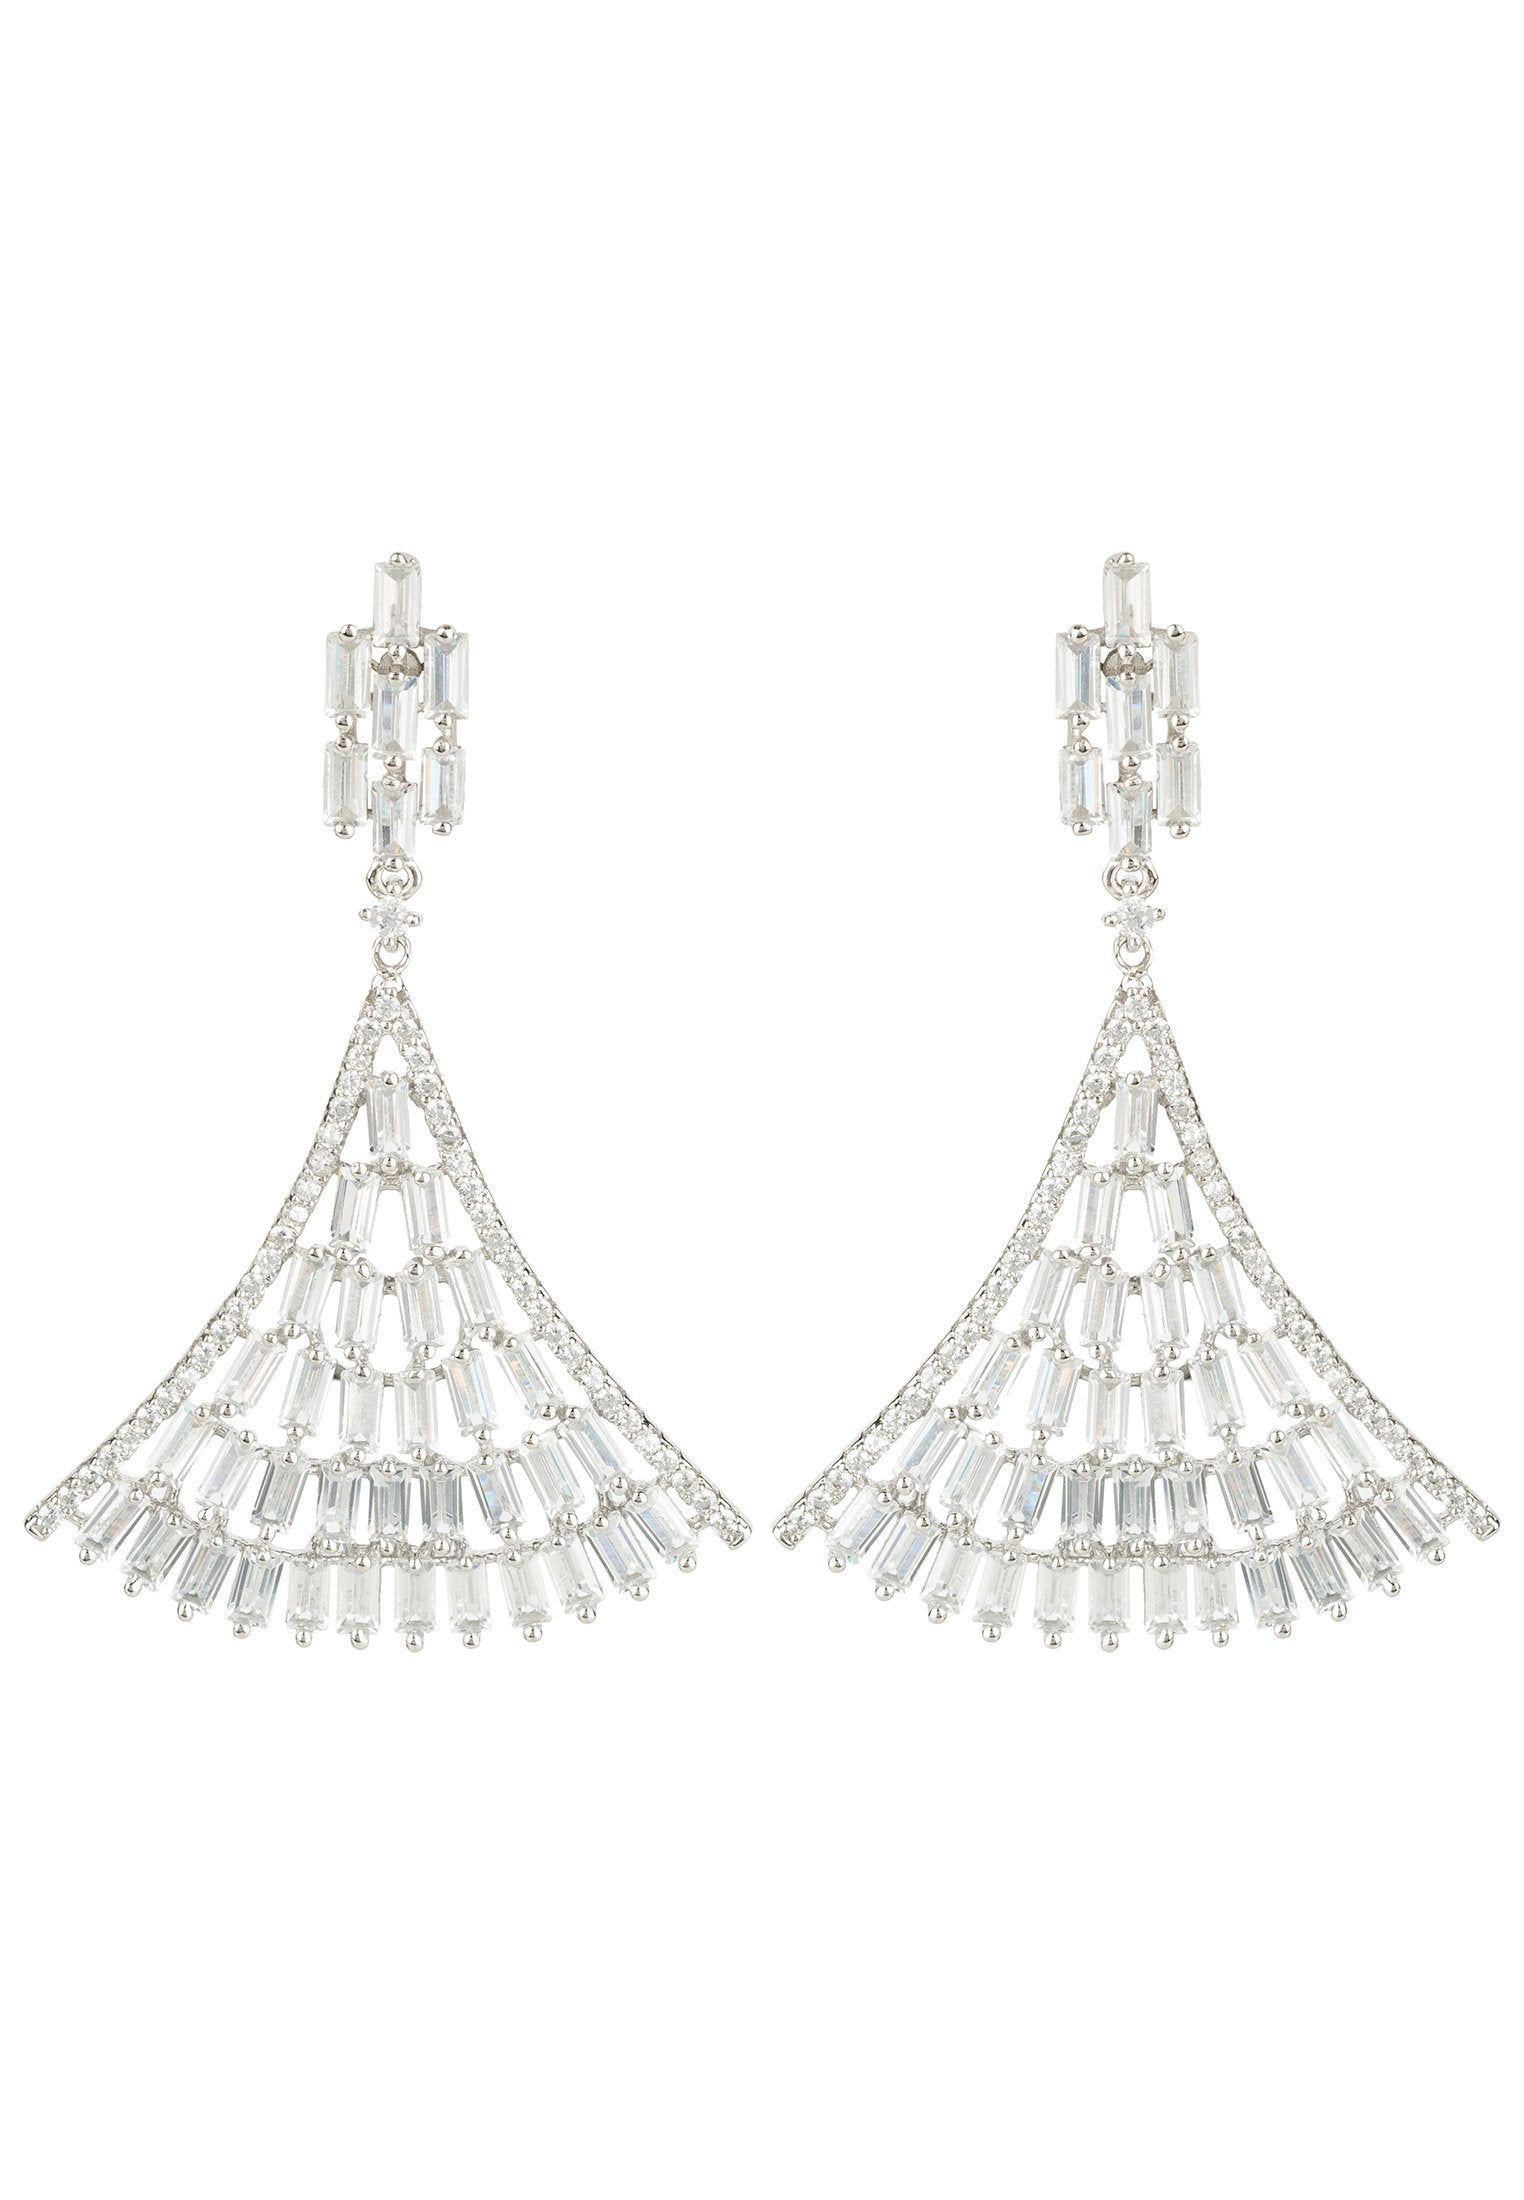 Sparkling Baguette Fan Tail Earrings in Sterling Silver - Perfect for Bridal and Evening Wear - Jewelry & Watches - Bijou Her -  -  - 